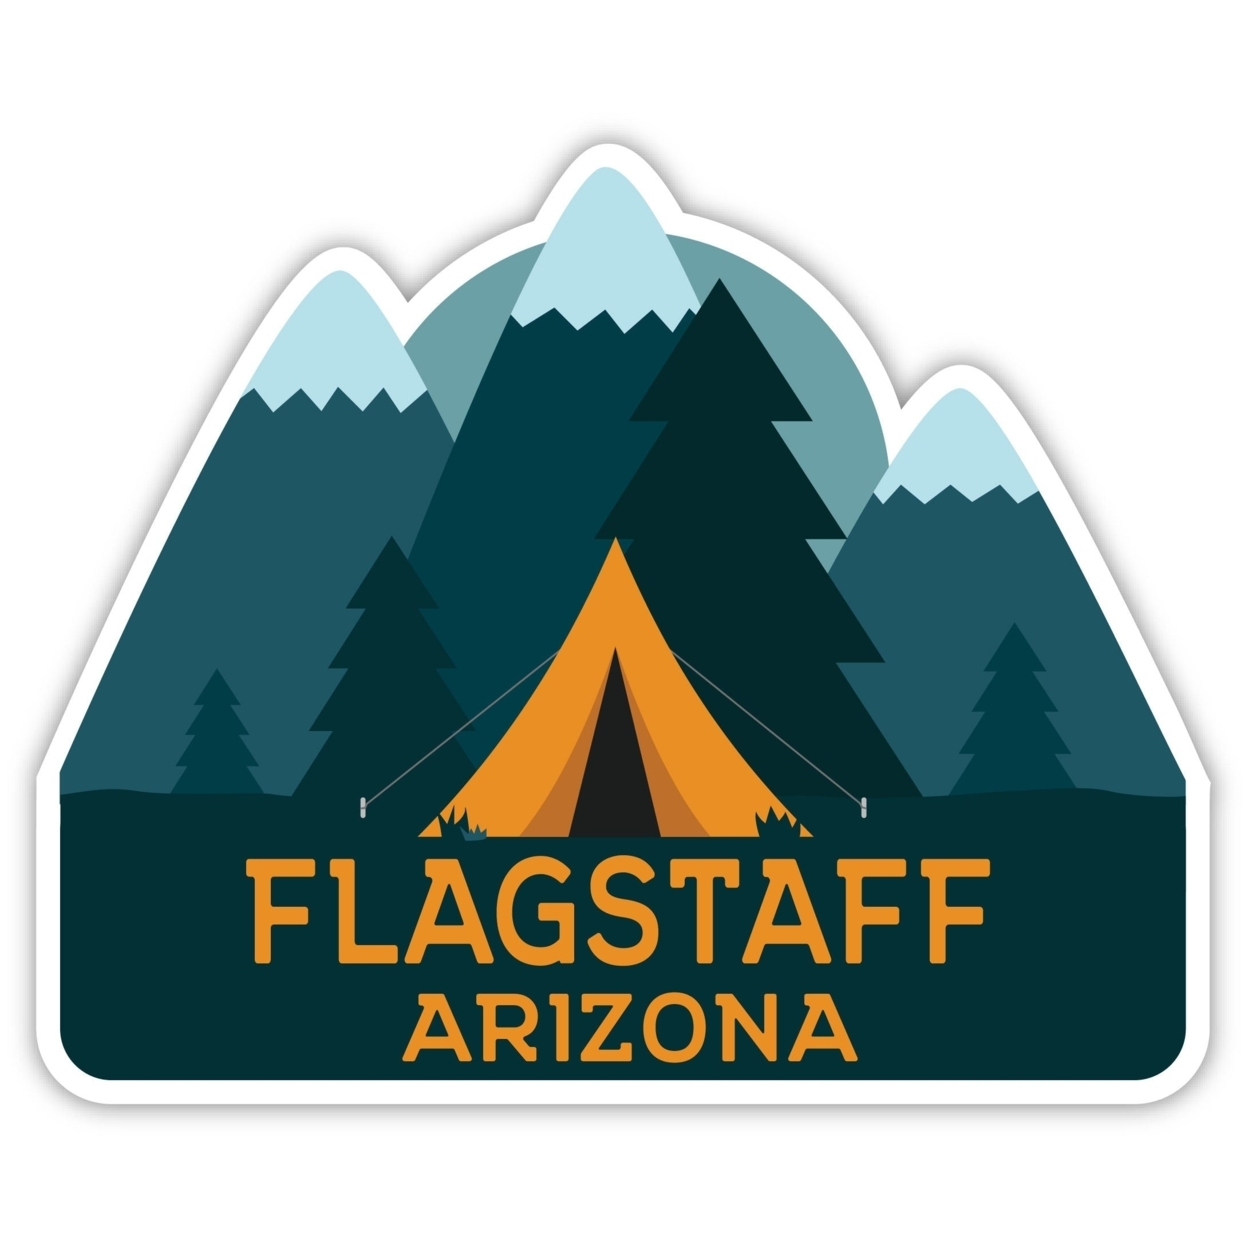 Flagstaff Arizona Souvenir Decorative Stickers (Choose Theme And Size) - 4-Pack, 4-Inch, Tent